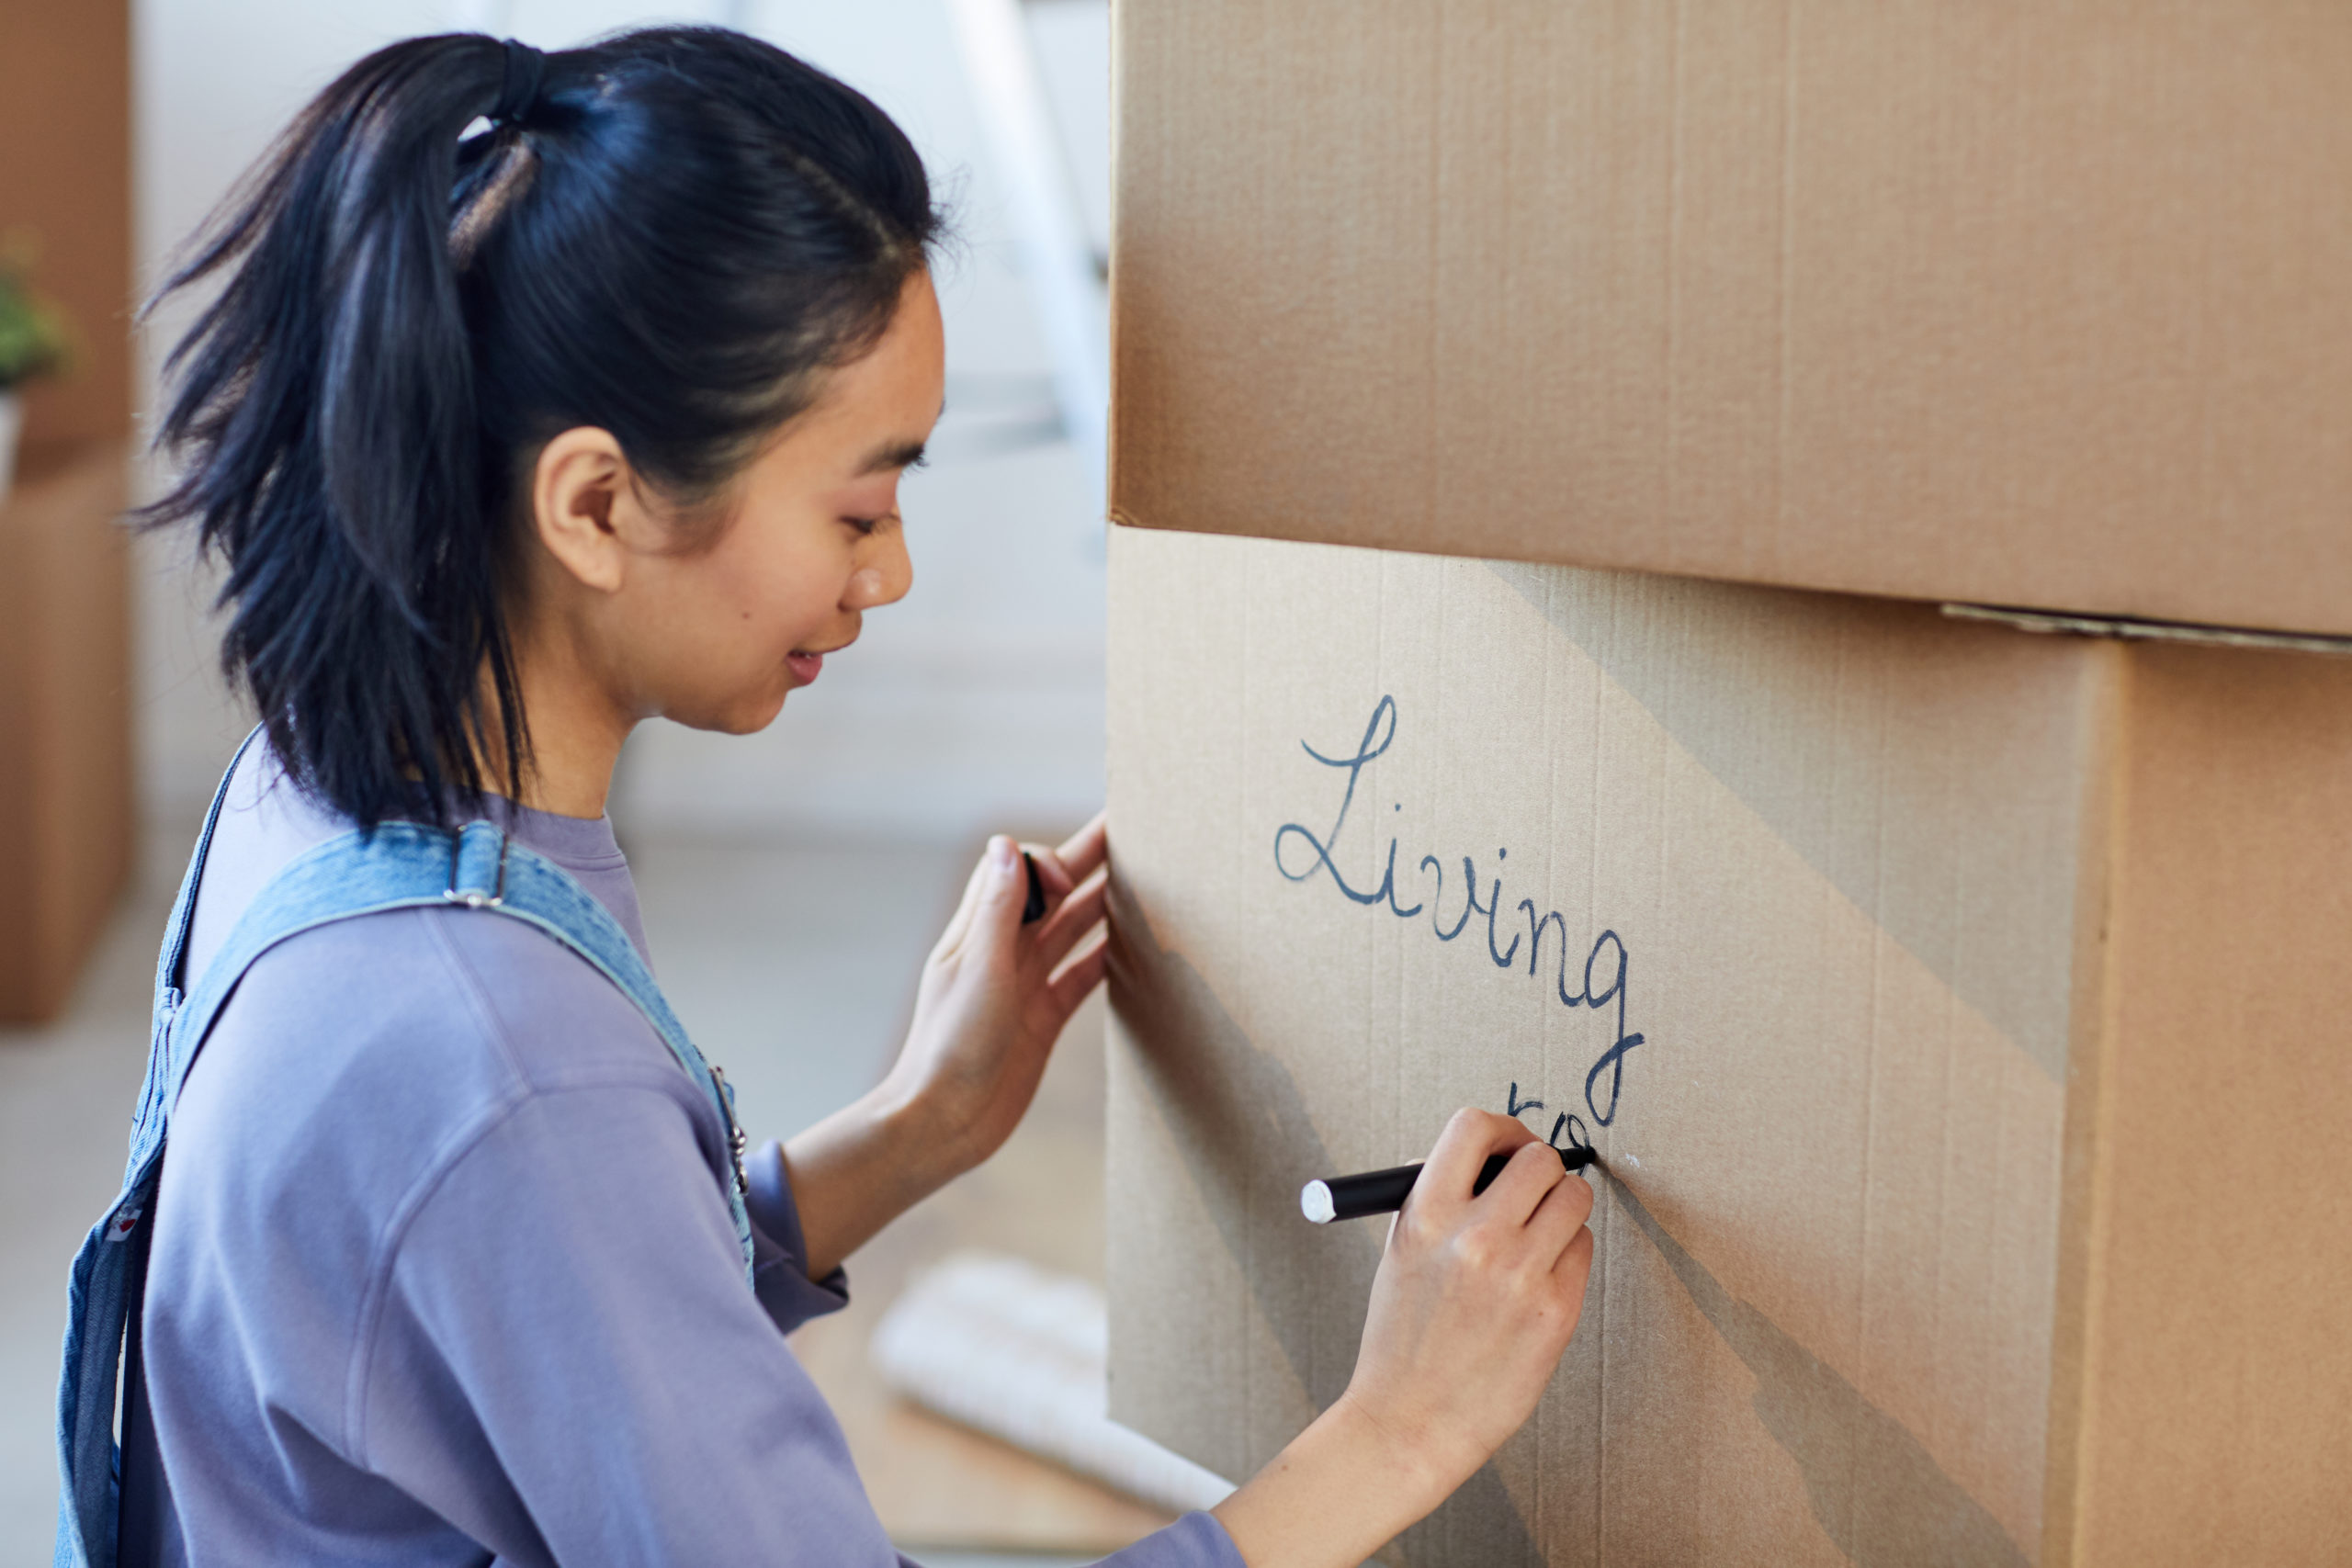 How to Label Moving Boxes: Read and Write With Care